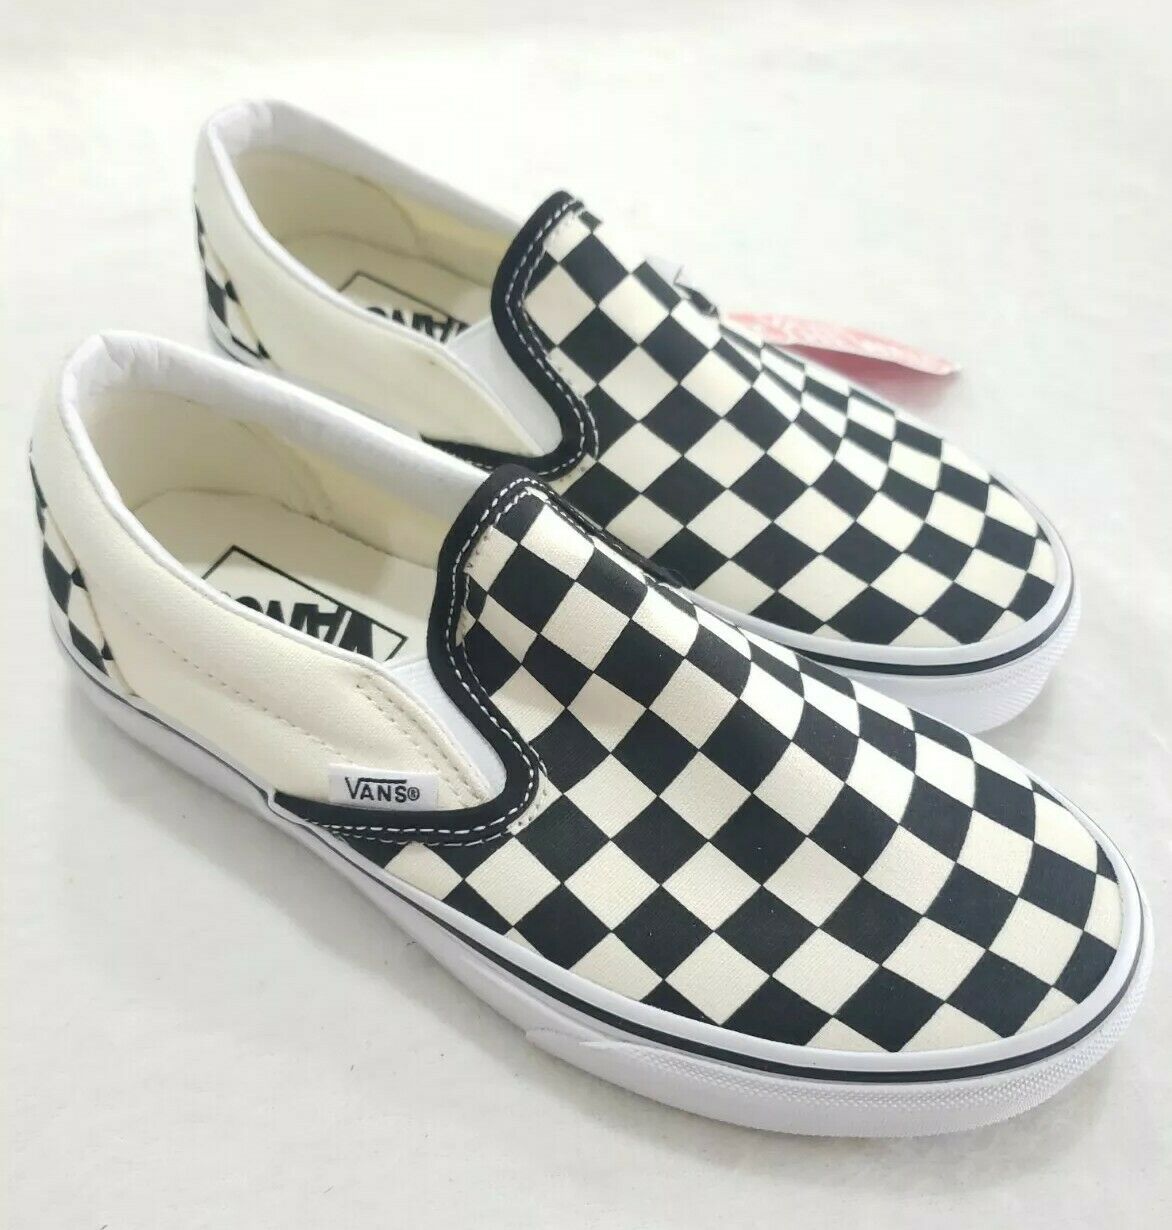 Vans Classic Slip on Checkerboard Trainer Sneaker Shoes Kids Toddler Size 3